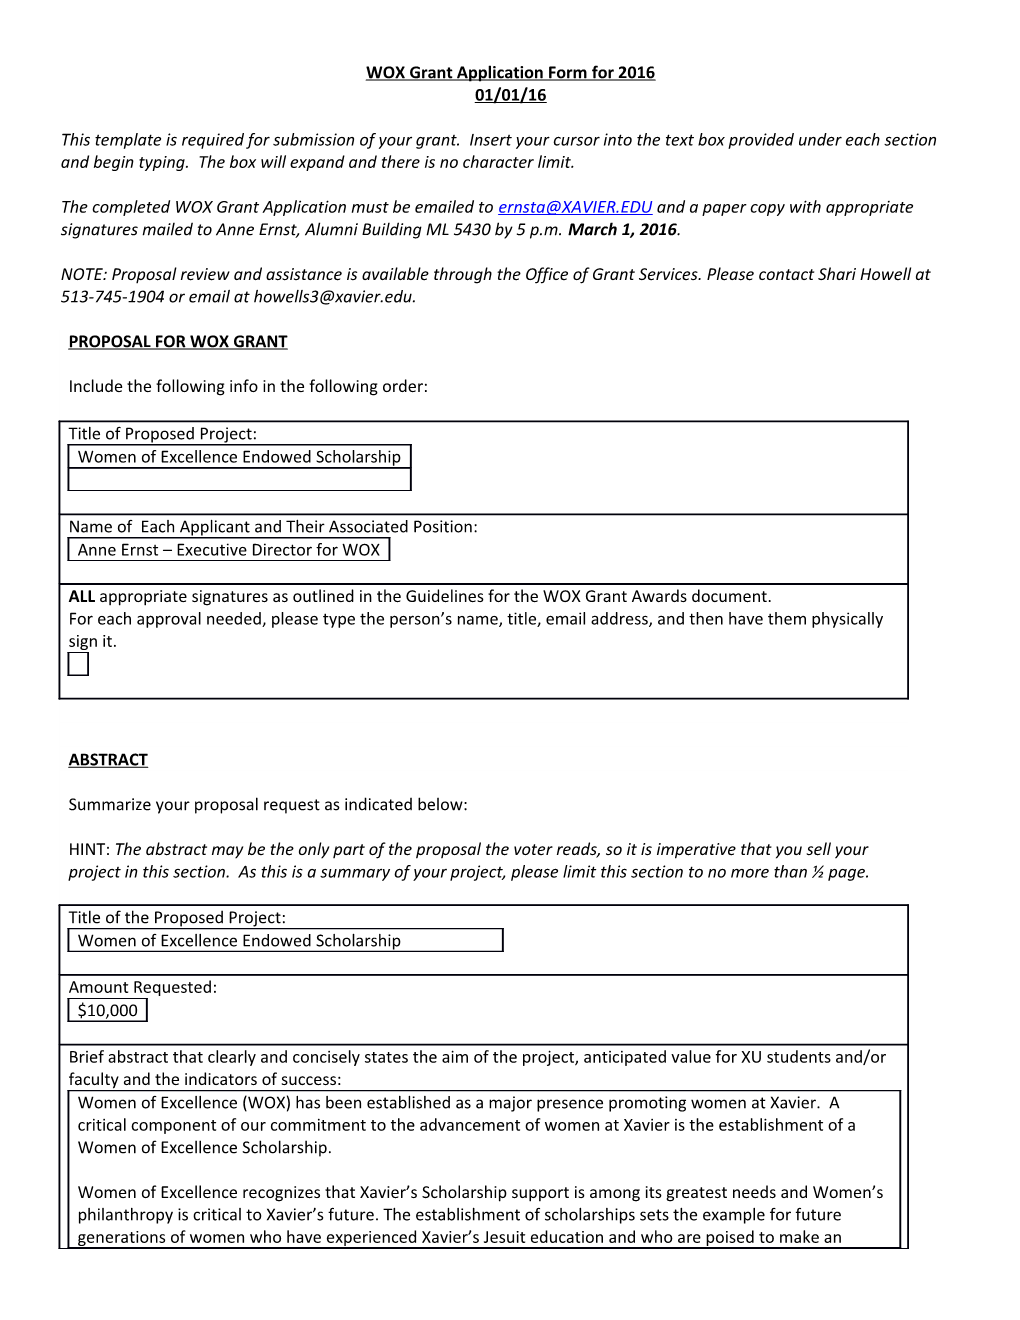 WOX Grant Application Form for 2016